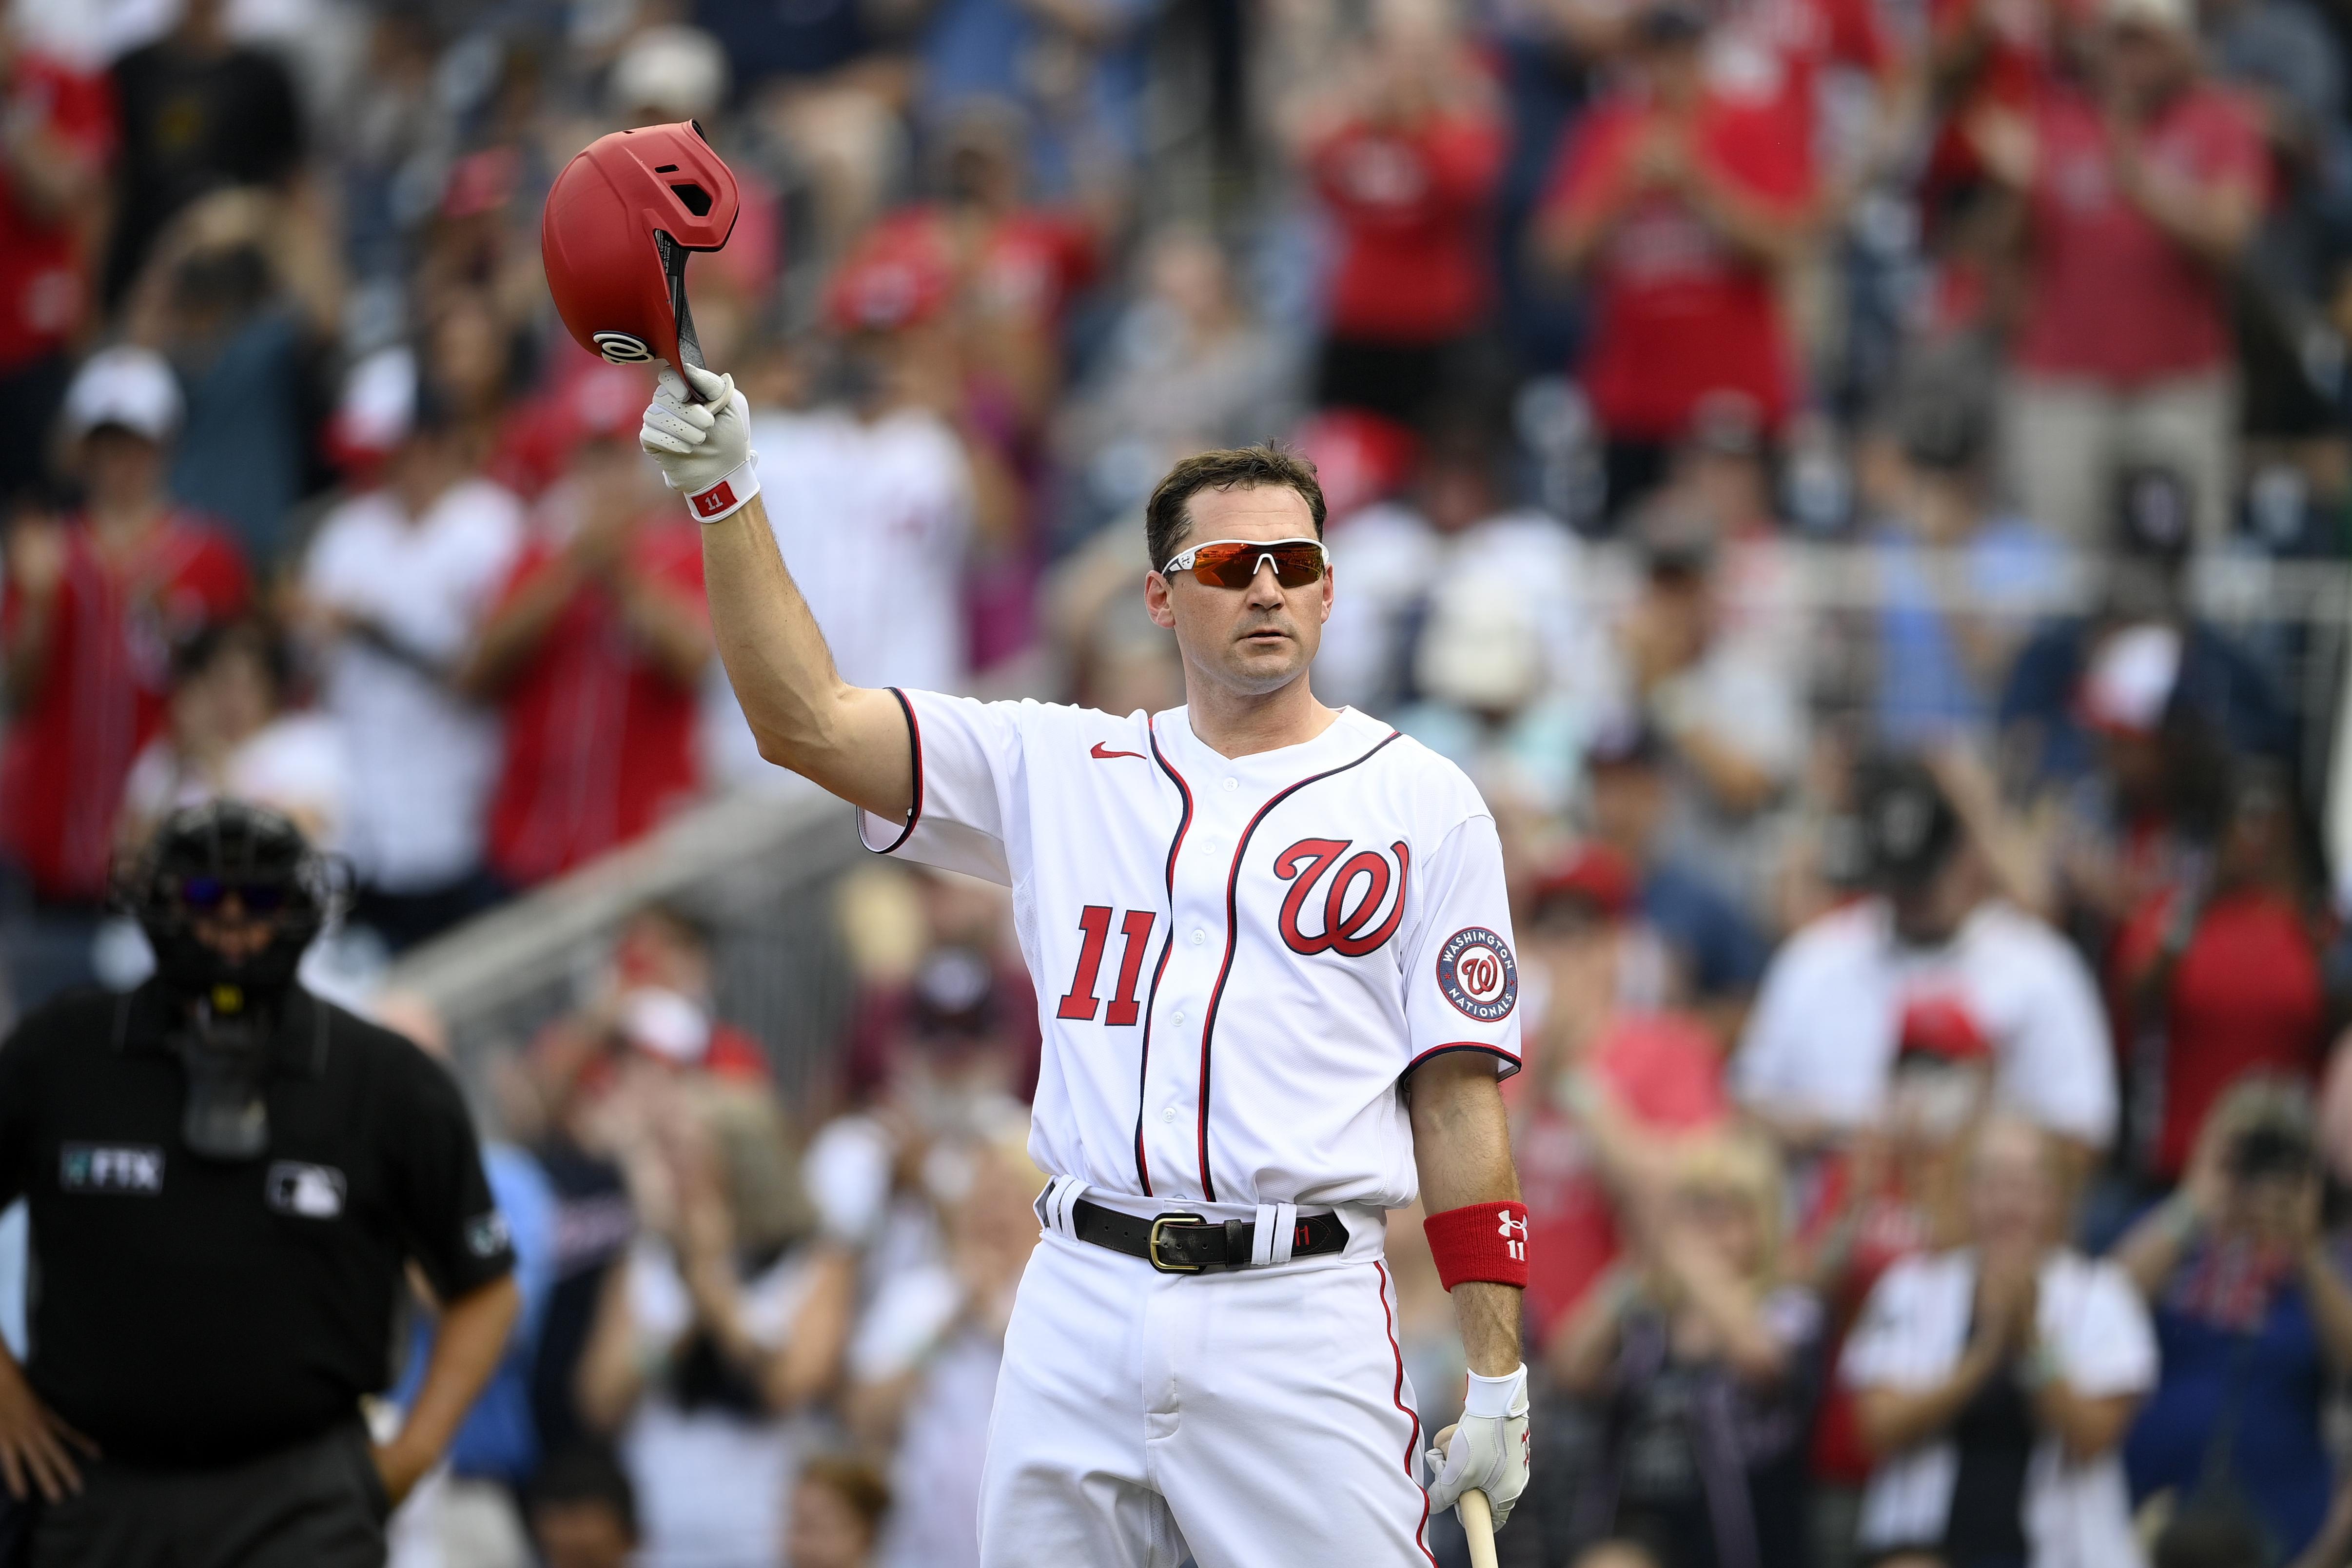 Nationals announce they are retiring No. 11 for Ryan Zimmerman